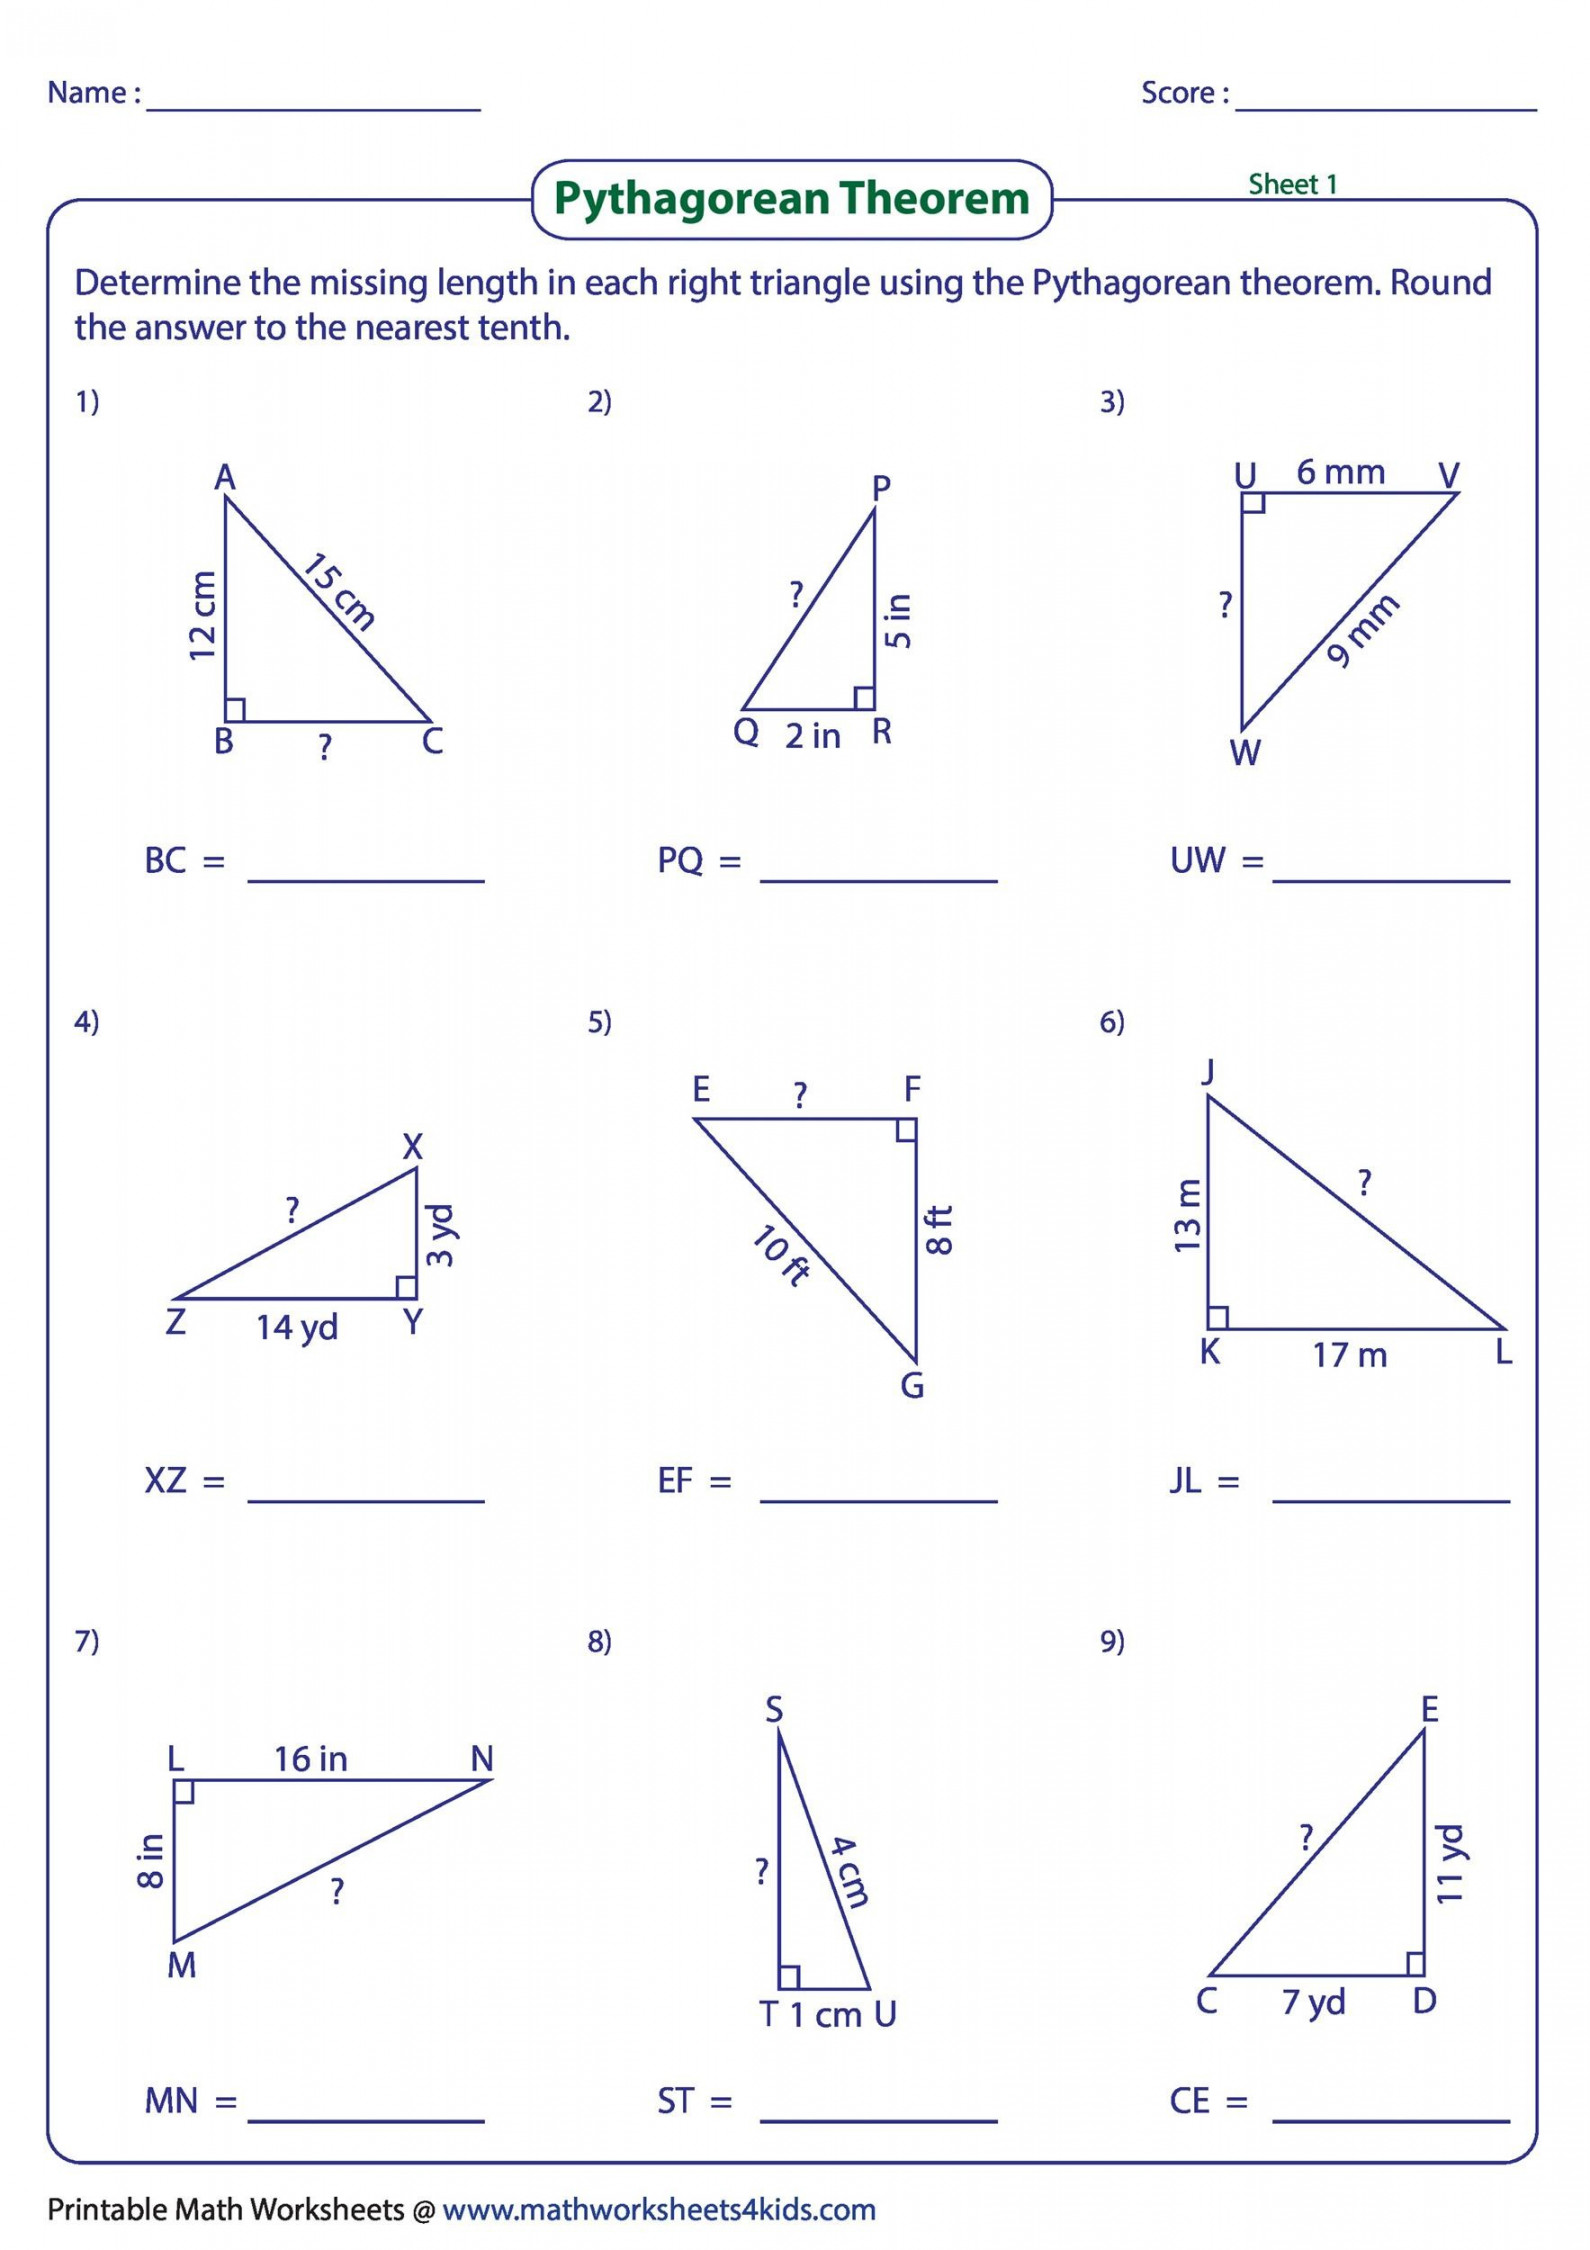 Pythagorean Theorem Worksheet with Answers [Word + PDF]